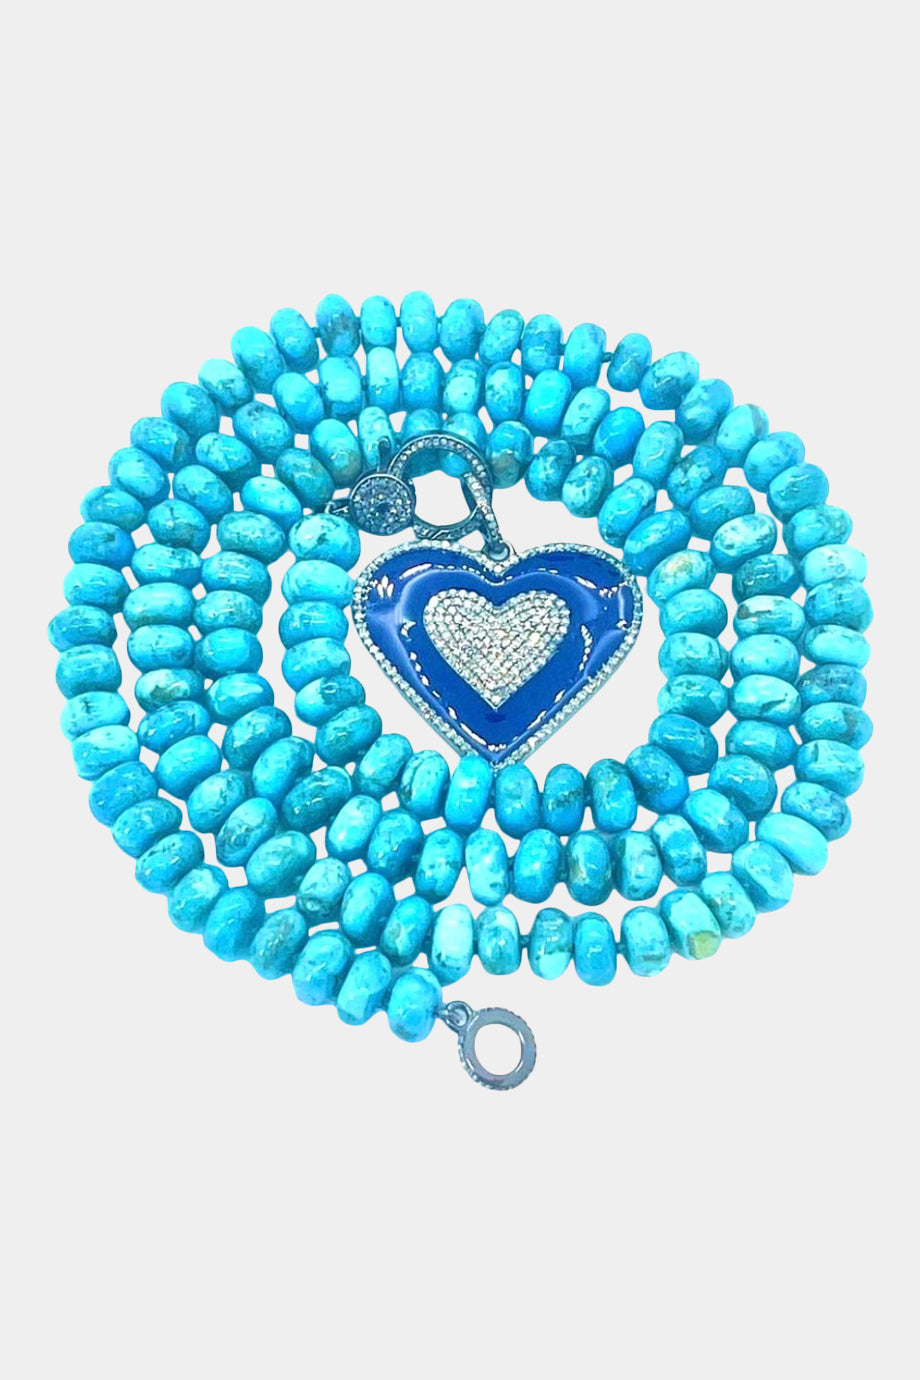 Turquoise Knotted Necklace with a Blue Enamel Heart Pendant